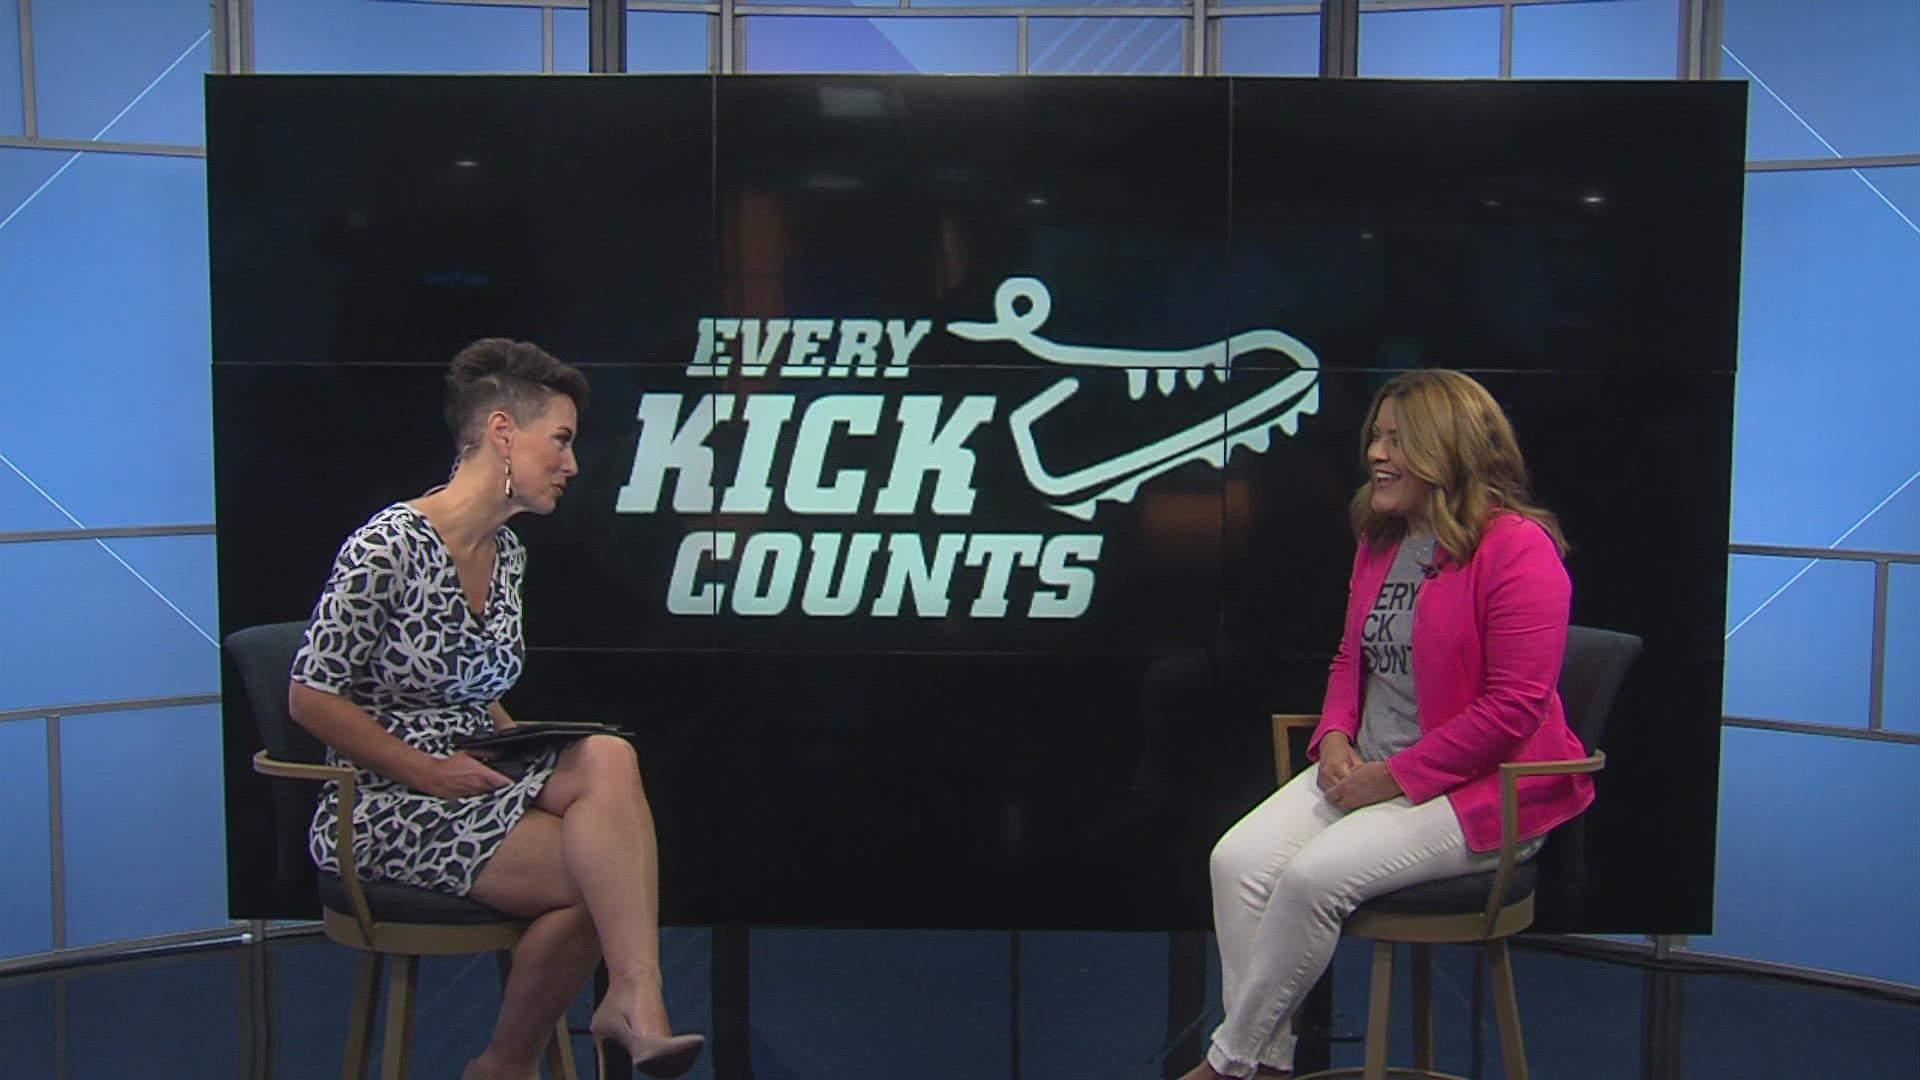 The stillbirth rate in Iowa has reduced by 32%, according to Kate Safris, one of the founding mothers of Count the Kicks.